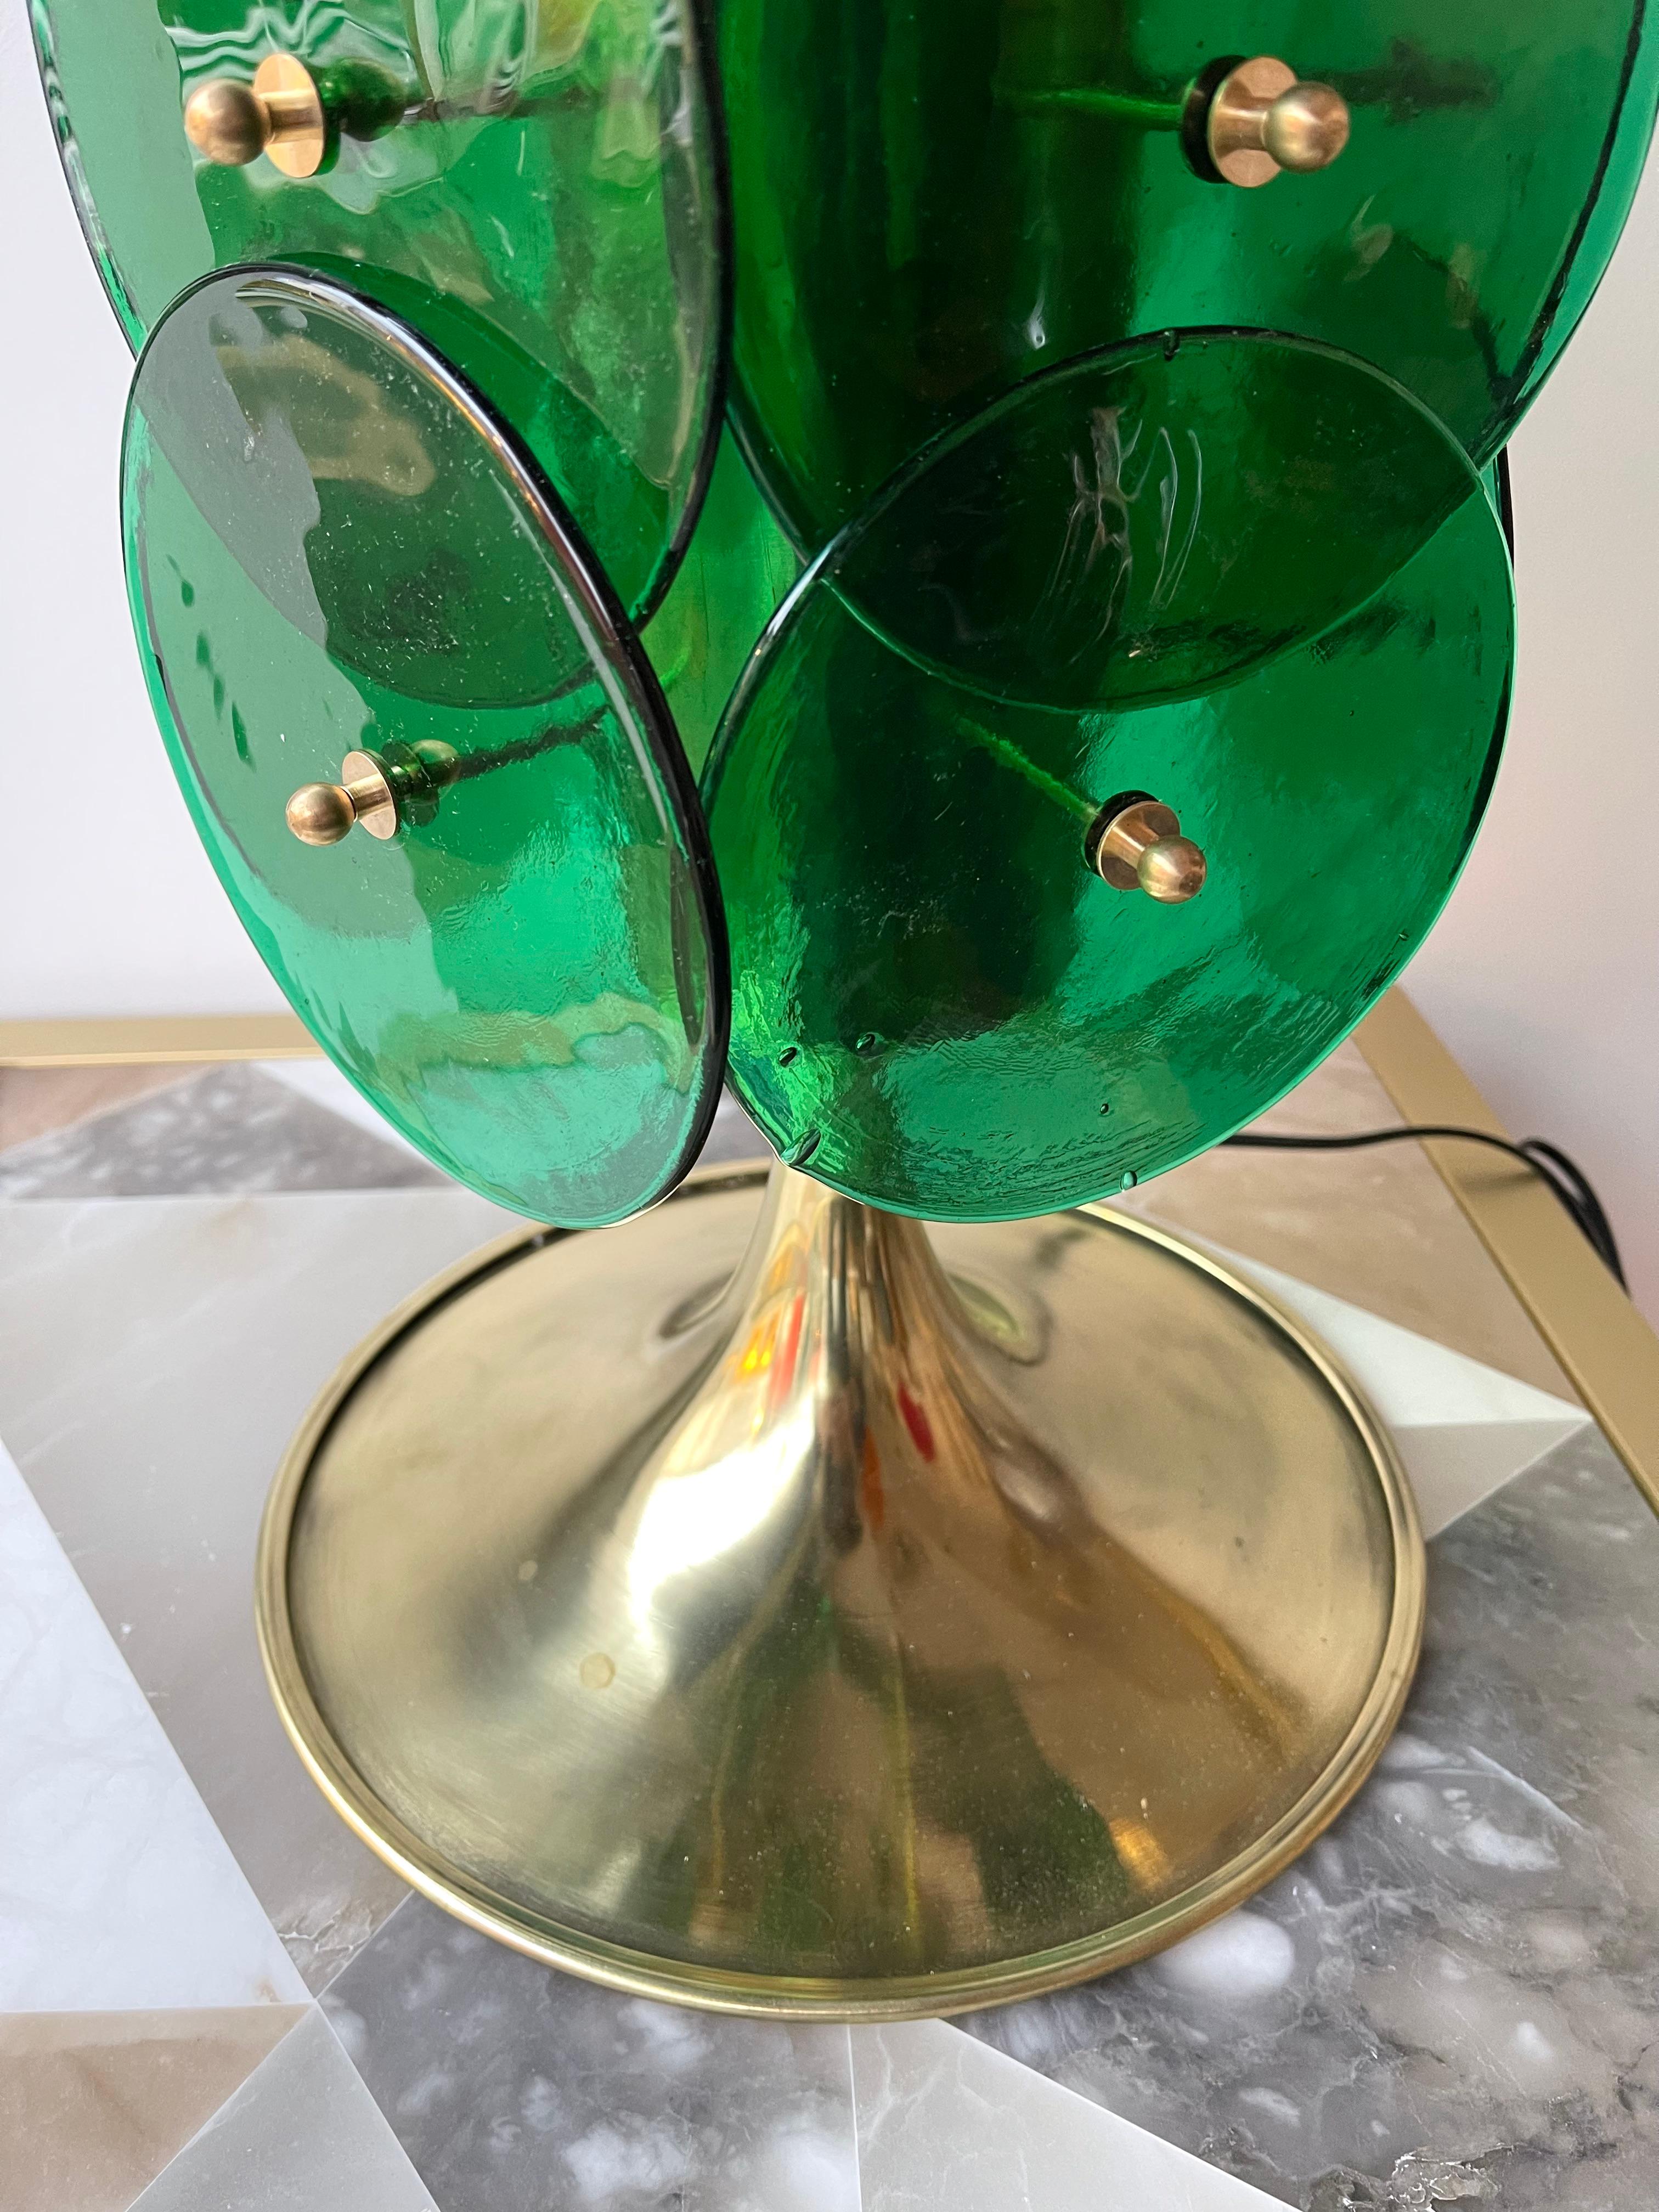 Pair of table or bedside brass lamps Murano glass disc green. Contemporary work from a small italian artisanal workshop. Made with old stock of glass from the italian design manufacture Venini.

Demo shades non included. Measurements in